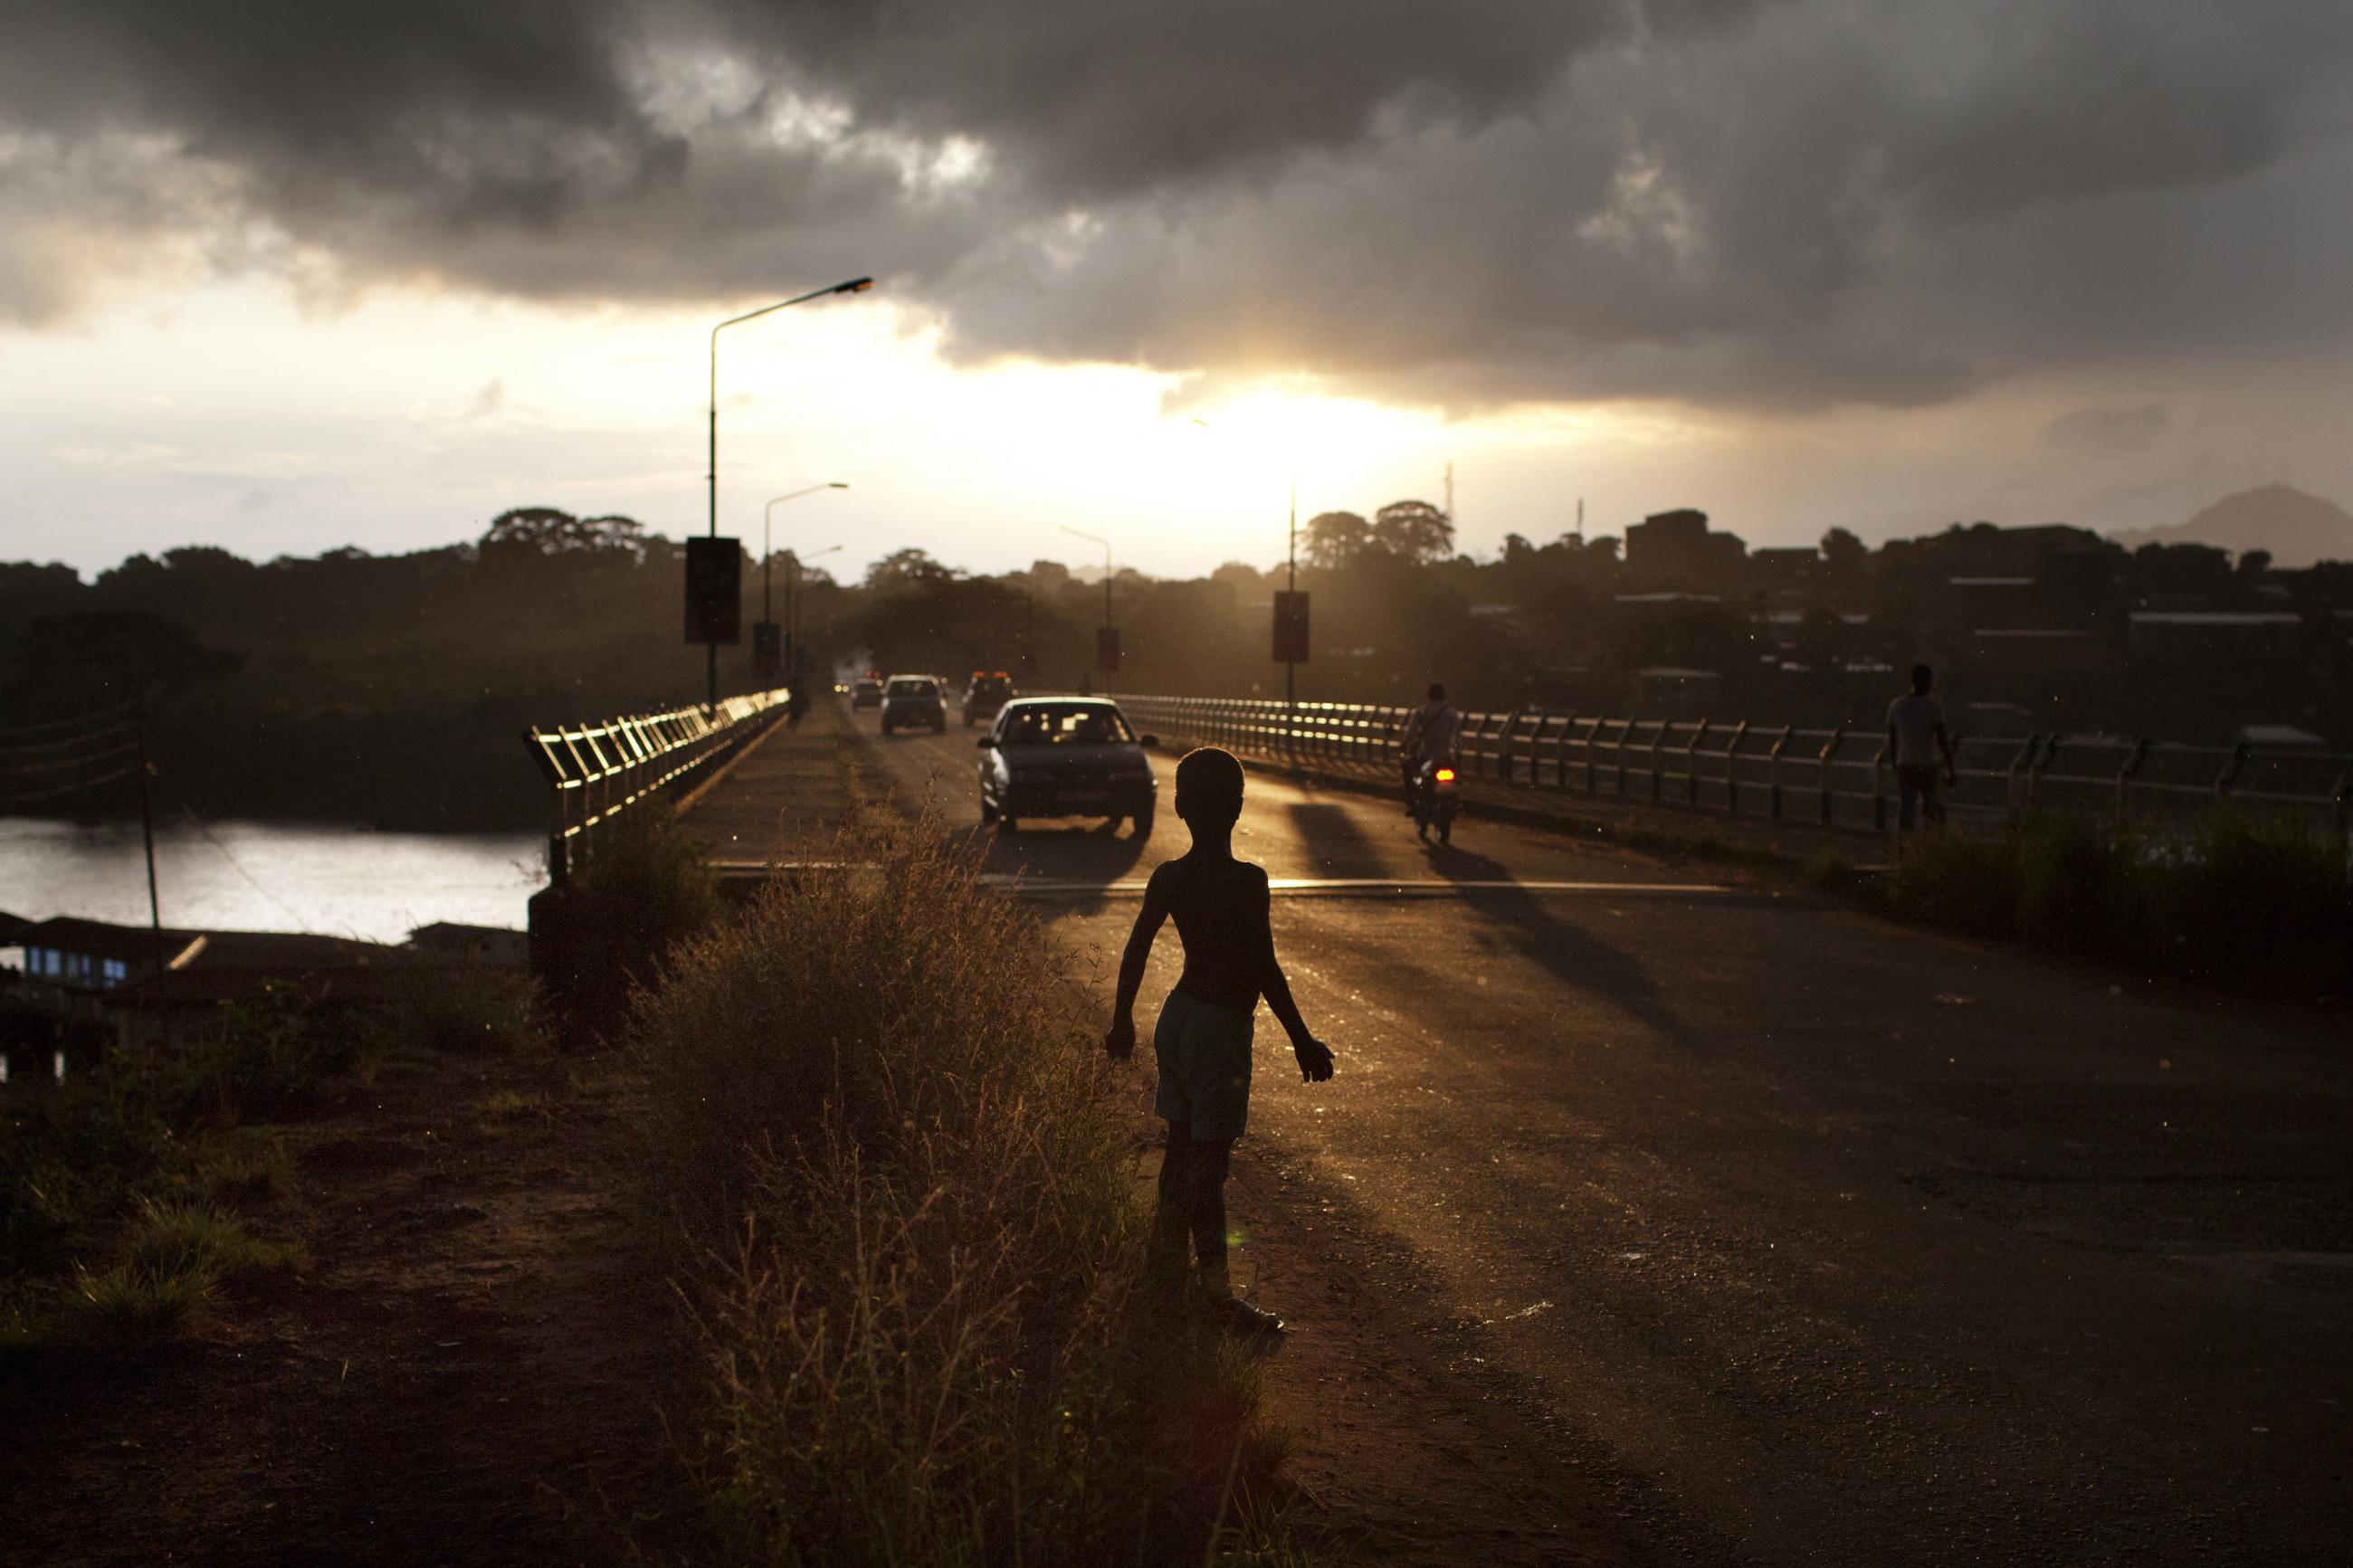 A boy stands on a road at dawn in Freetown, Sierra Leone, November 21, 2012.